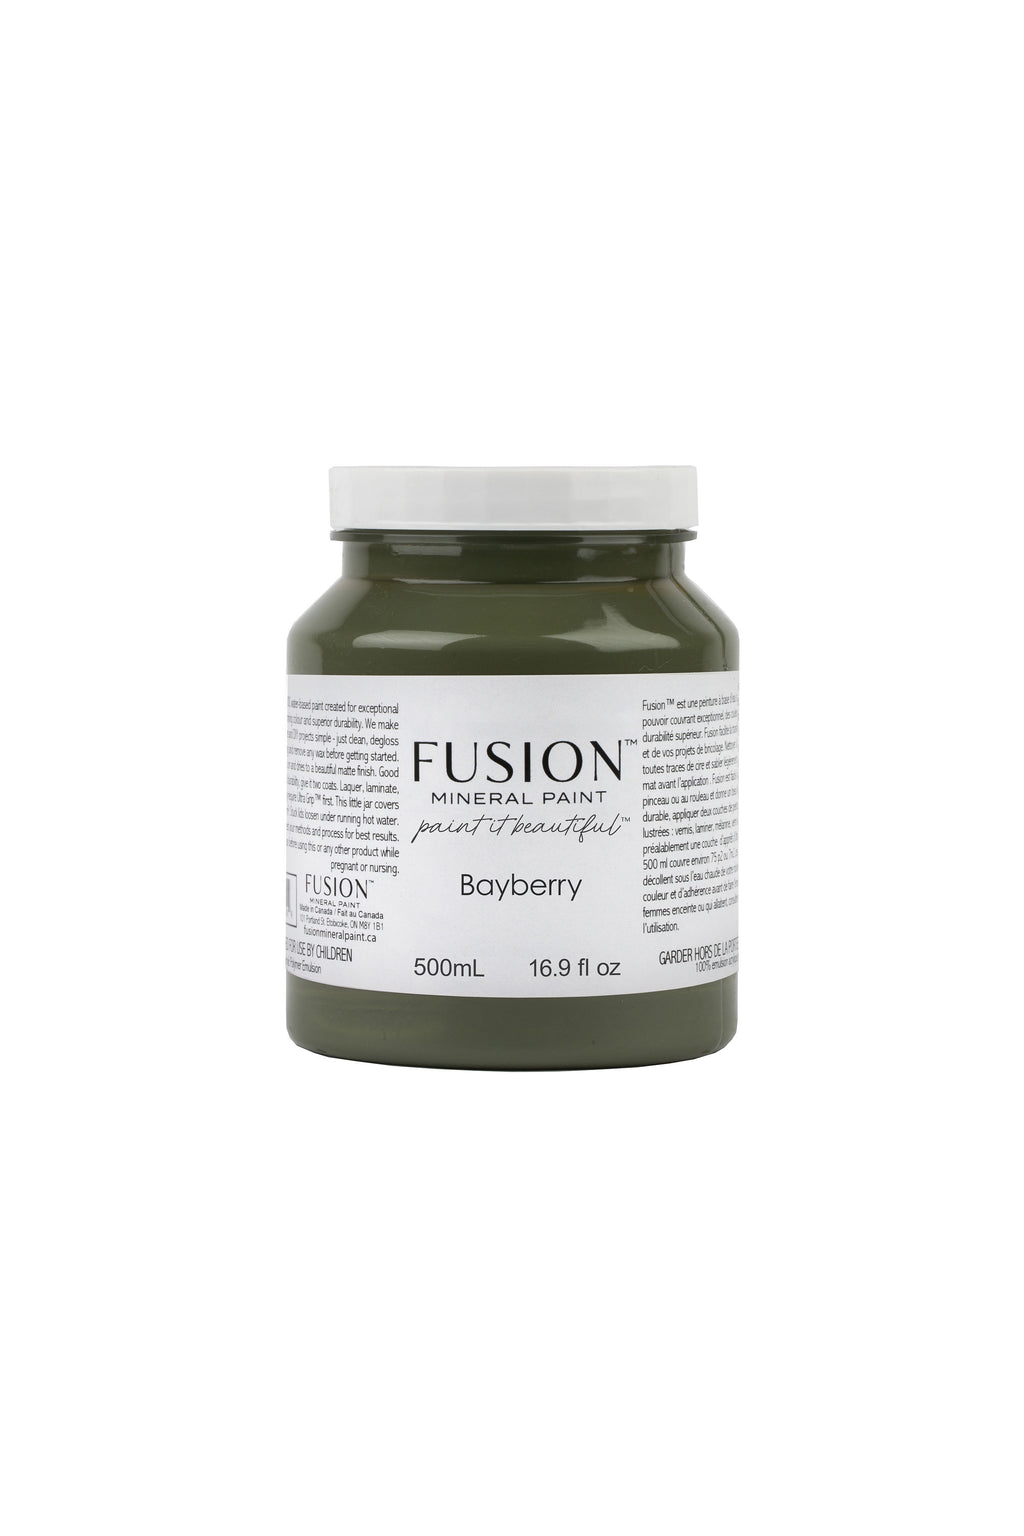 Bayberry Fusion Mineral Paint - Pint